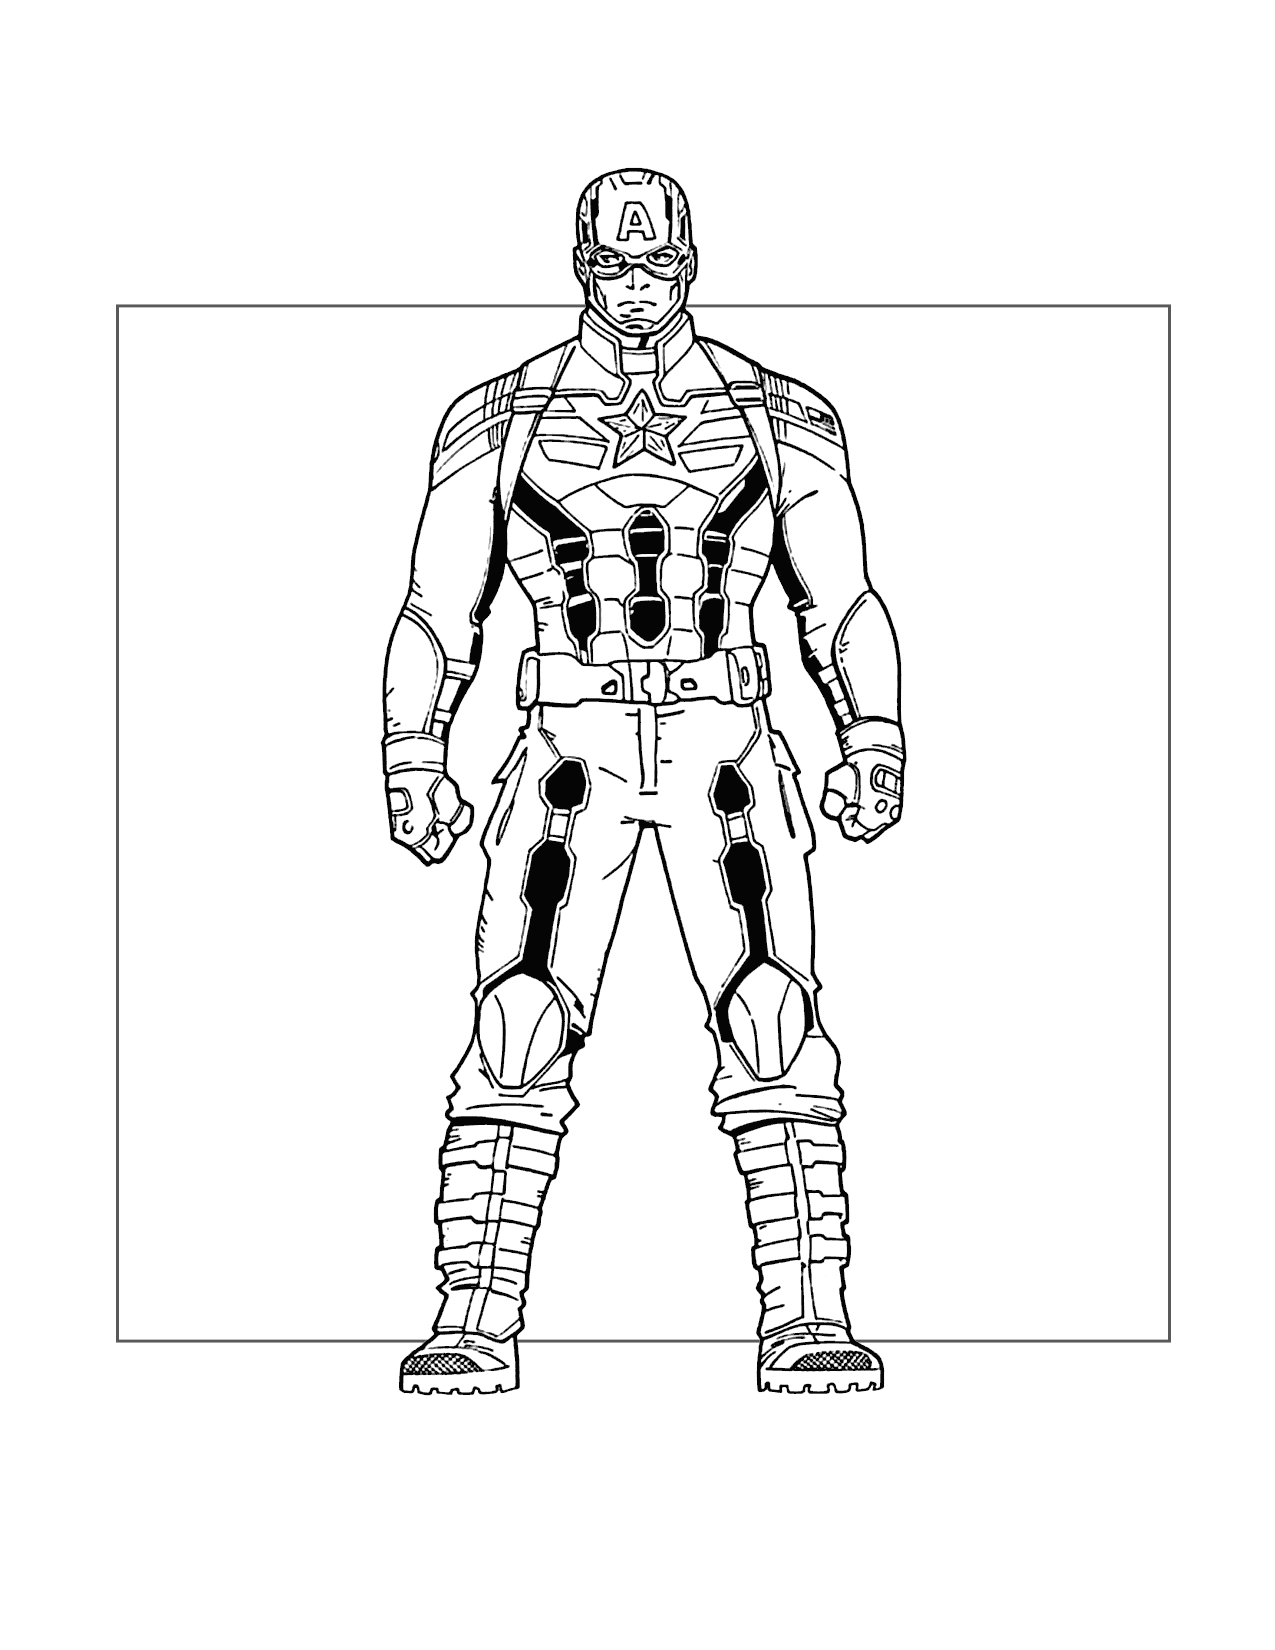 Captain America Is Ready Coloring Page